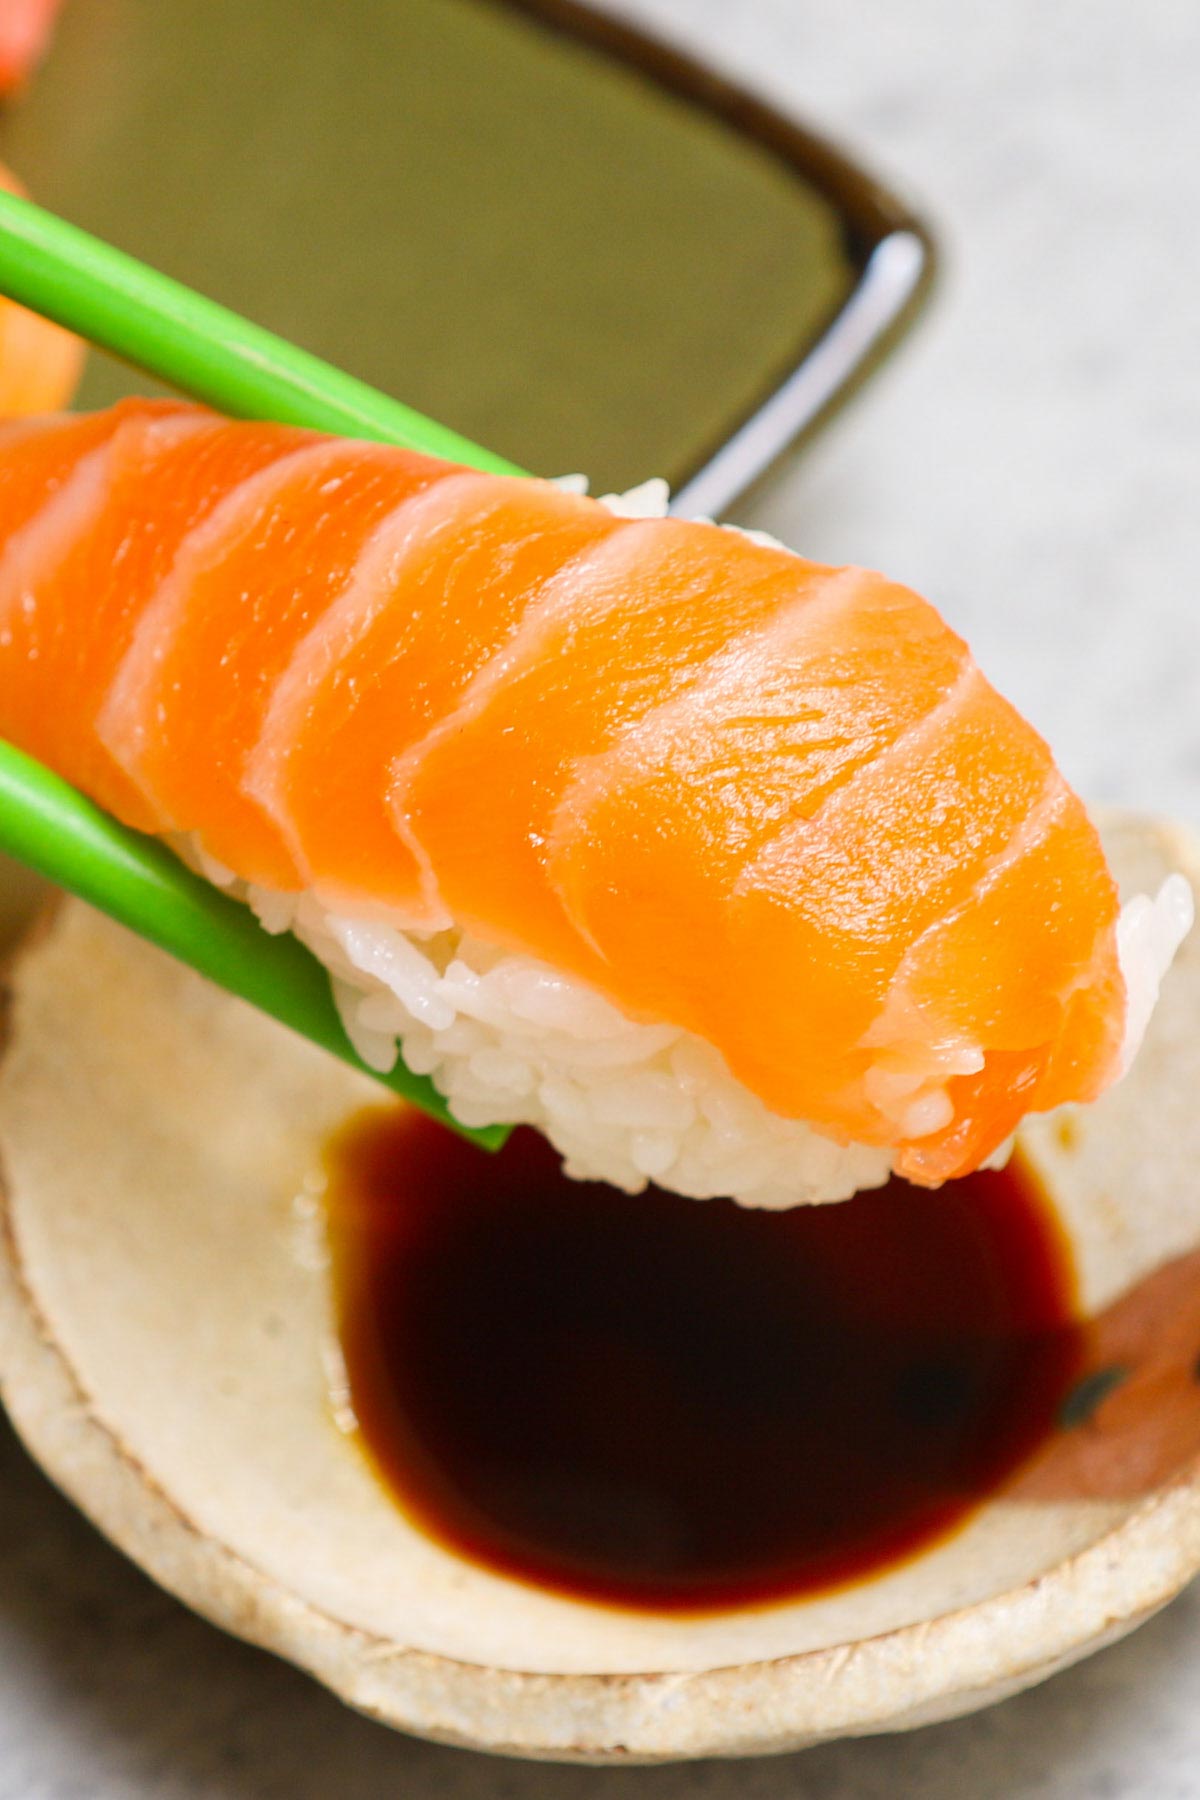 An easy and complete homemade Nigiri tutorial with lots of tips and tricks. Unlike maki sushi, nigiri isn’t rolled. Instead, it’s comprised of a thin slice of raw or cooked seafood like salmon or shrimp atop a mound of vinegary rice. You’ll learn everything about Japanese nigiri including the difference between nigiri and sashimi, and how to make perfect nigiri at home